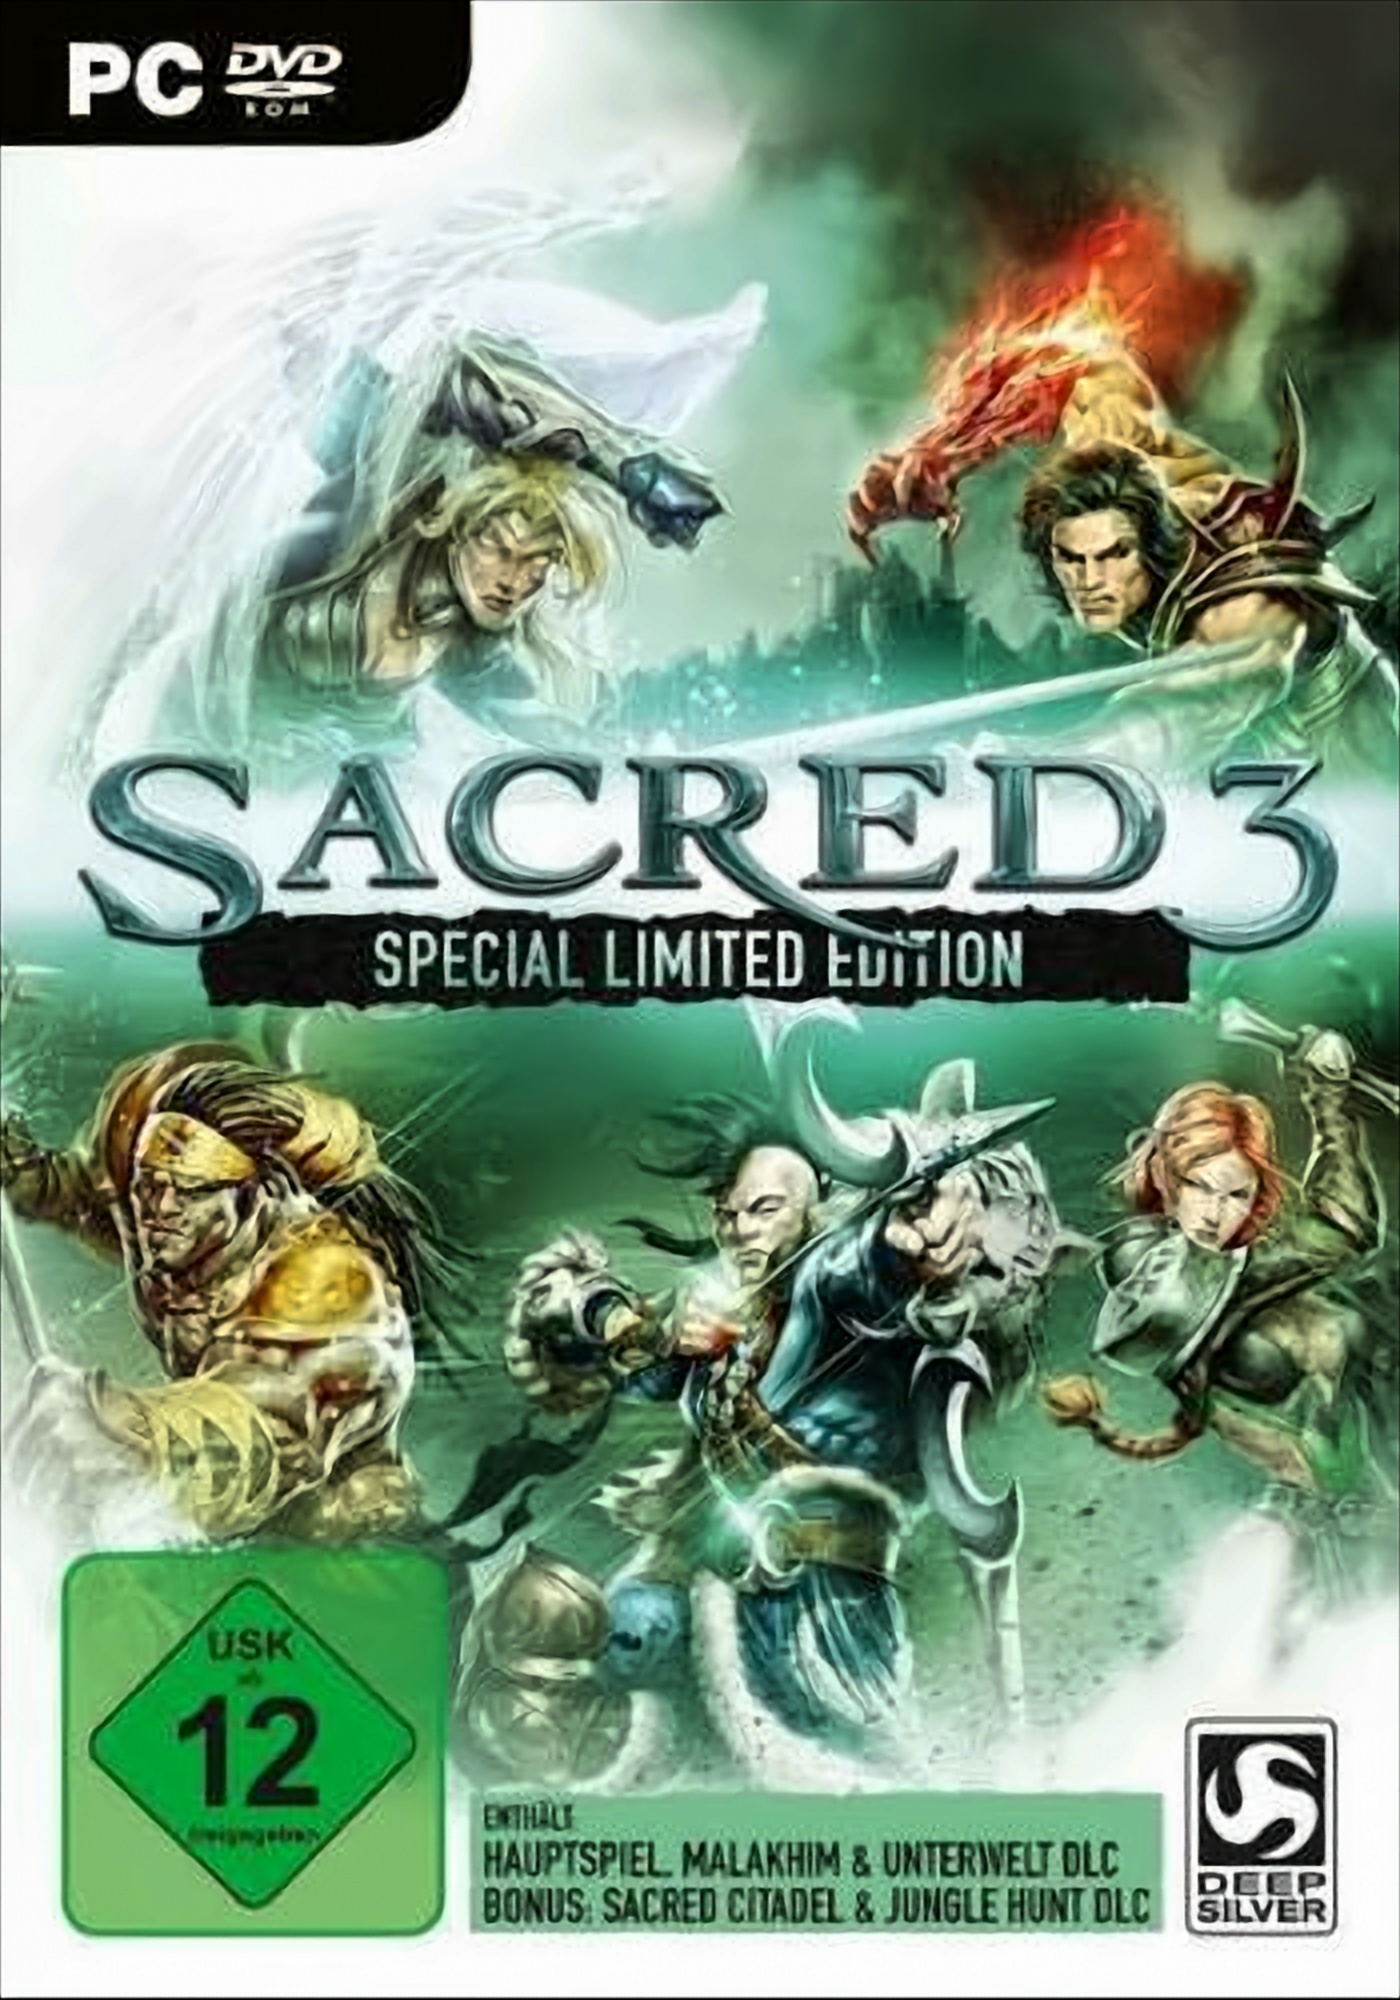 Sacred 3 - Special Limited Edition von Deep Silver